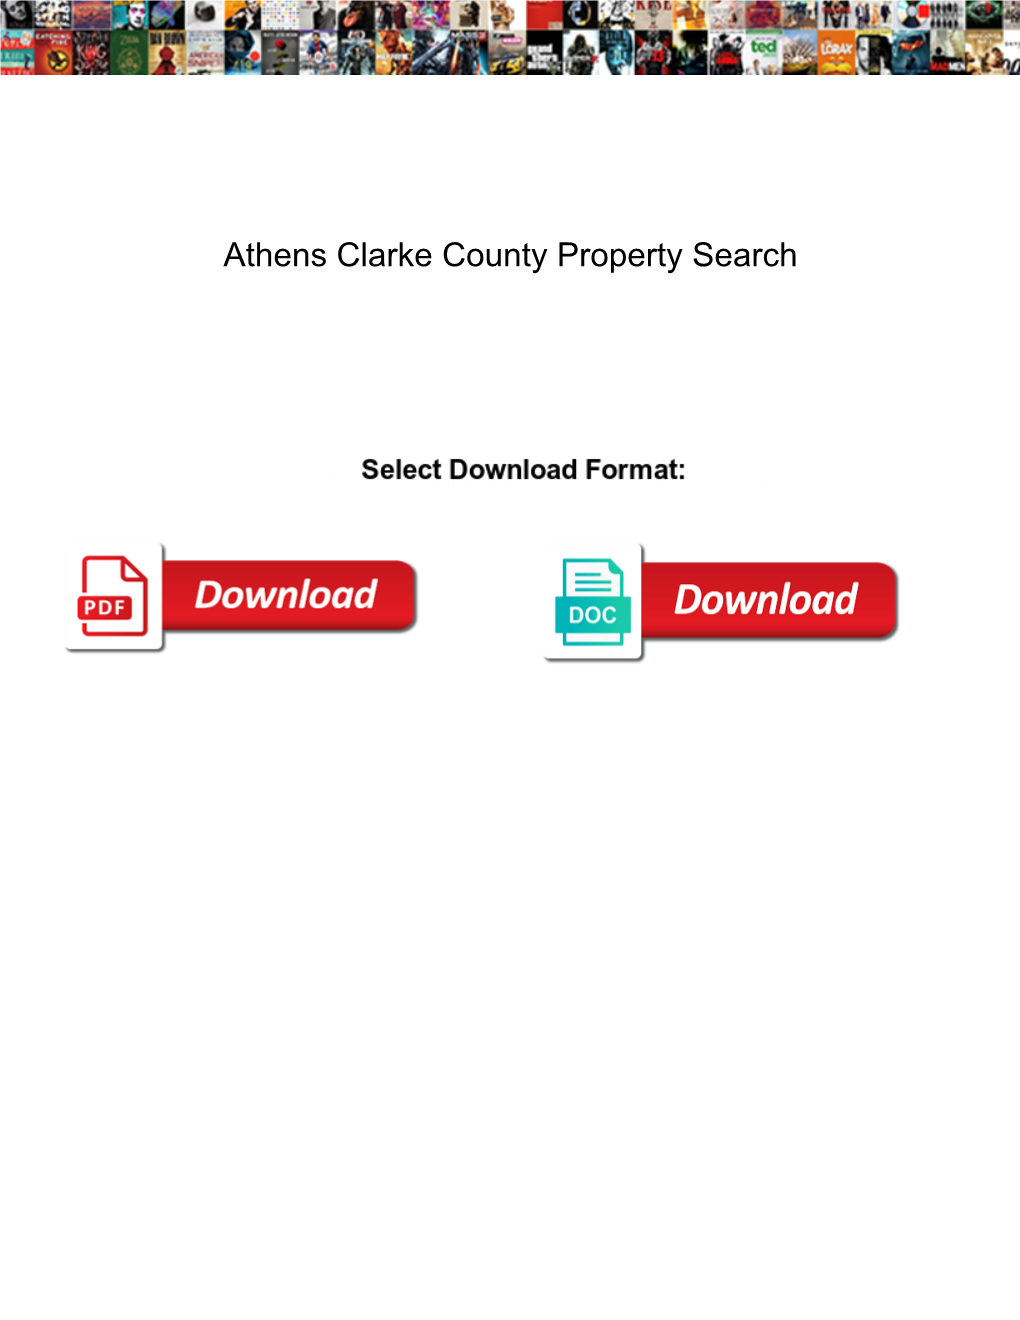 Athens Clarke County Property Search